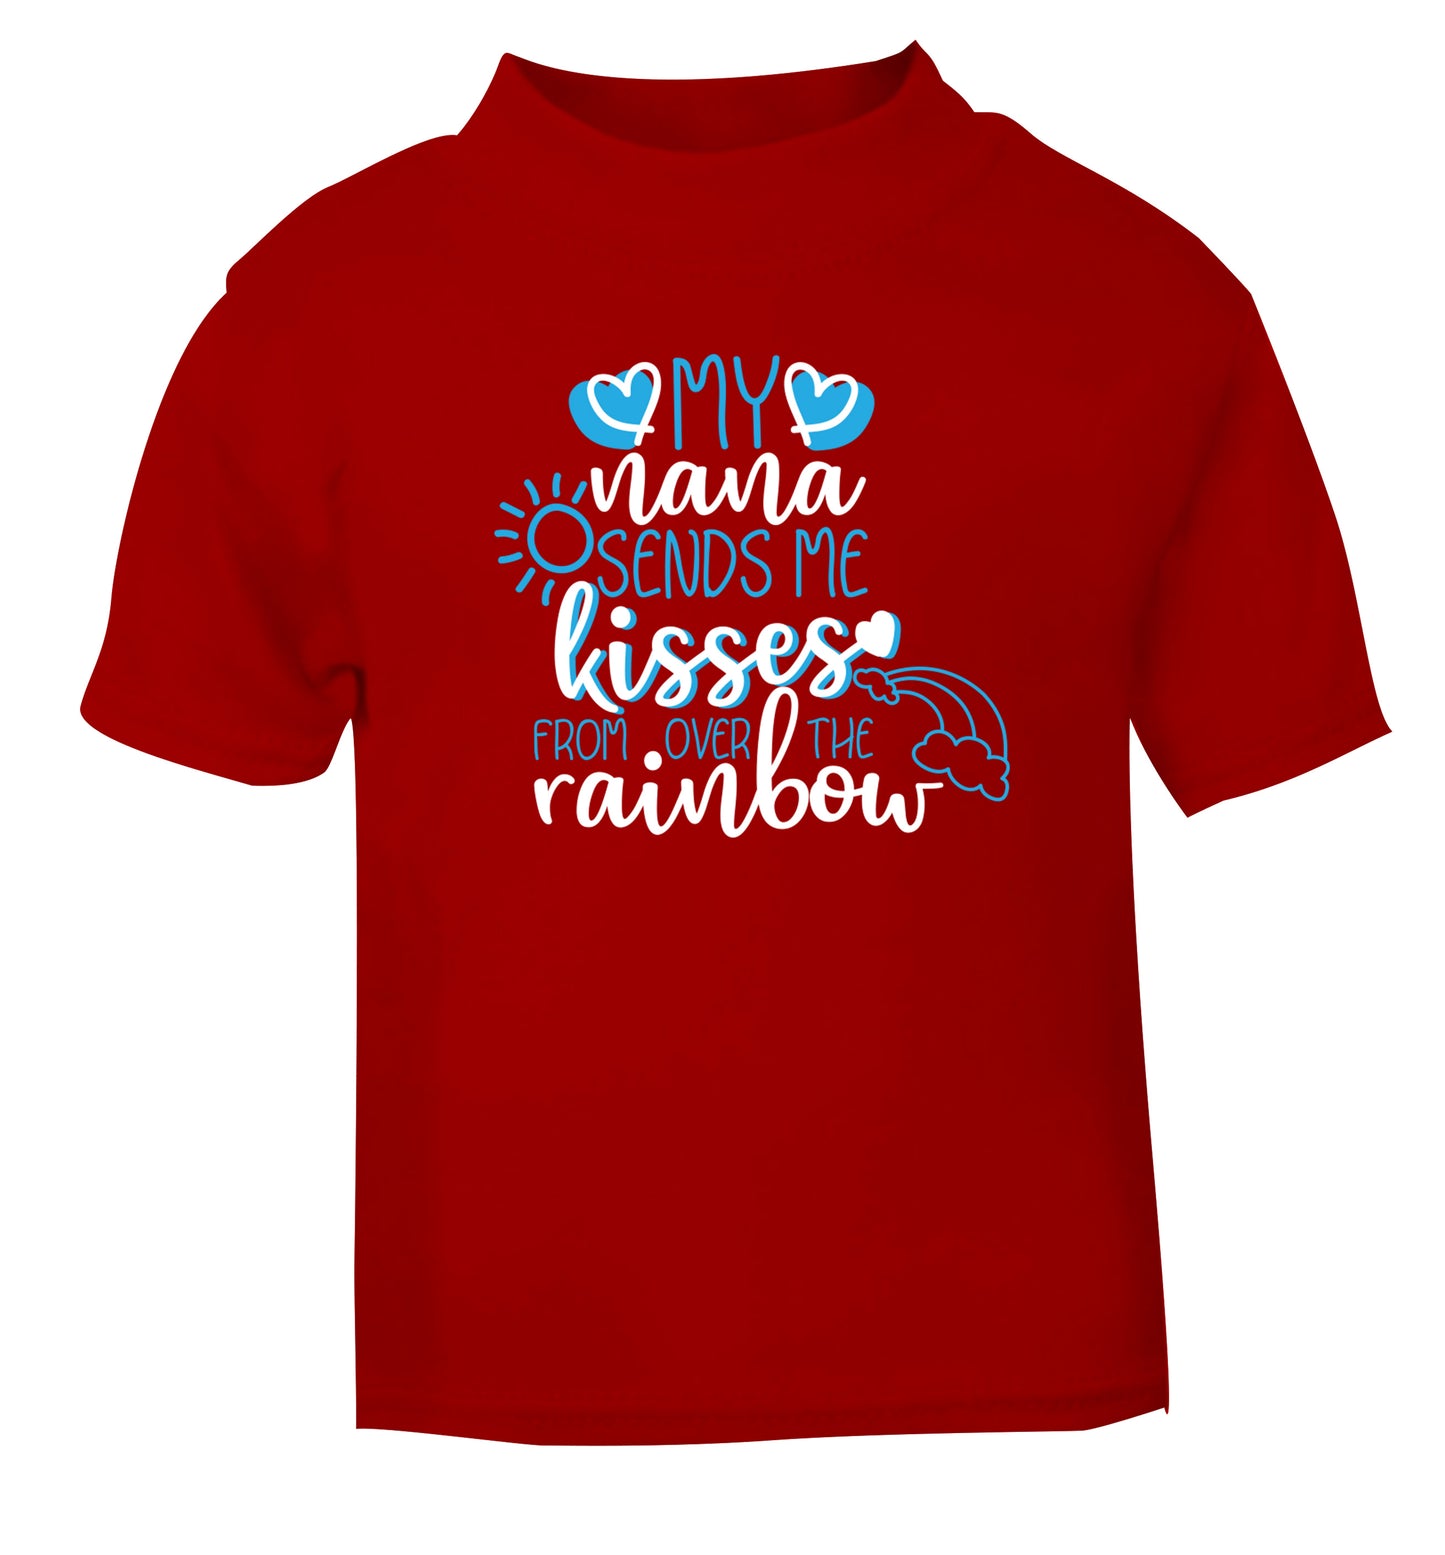 My nana sends me kisses from over the rainbow red Baby Toddler Tshirt 2 Years